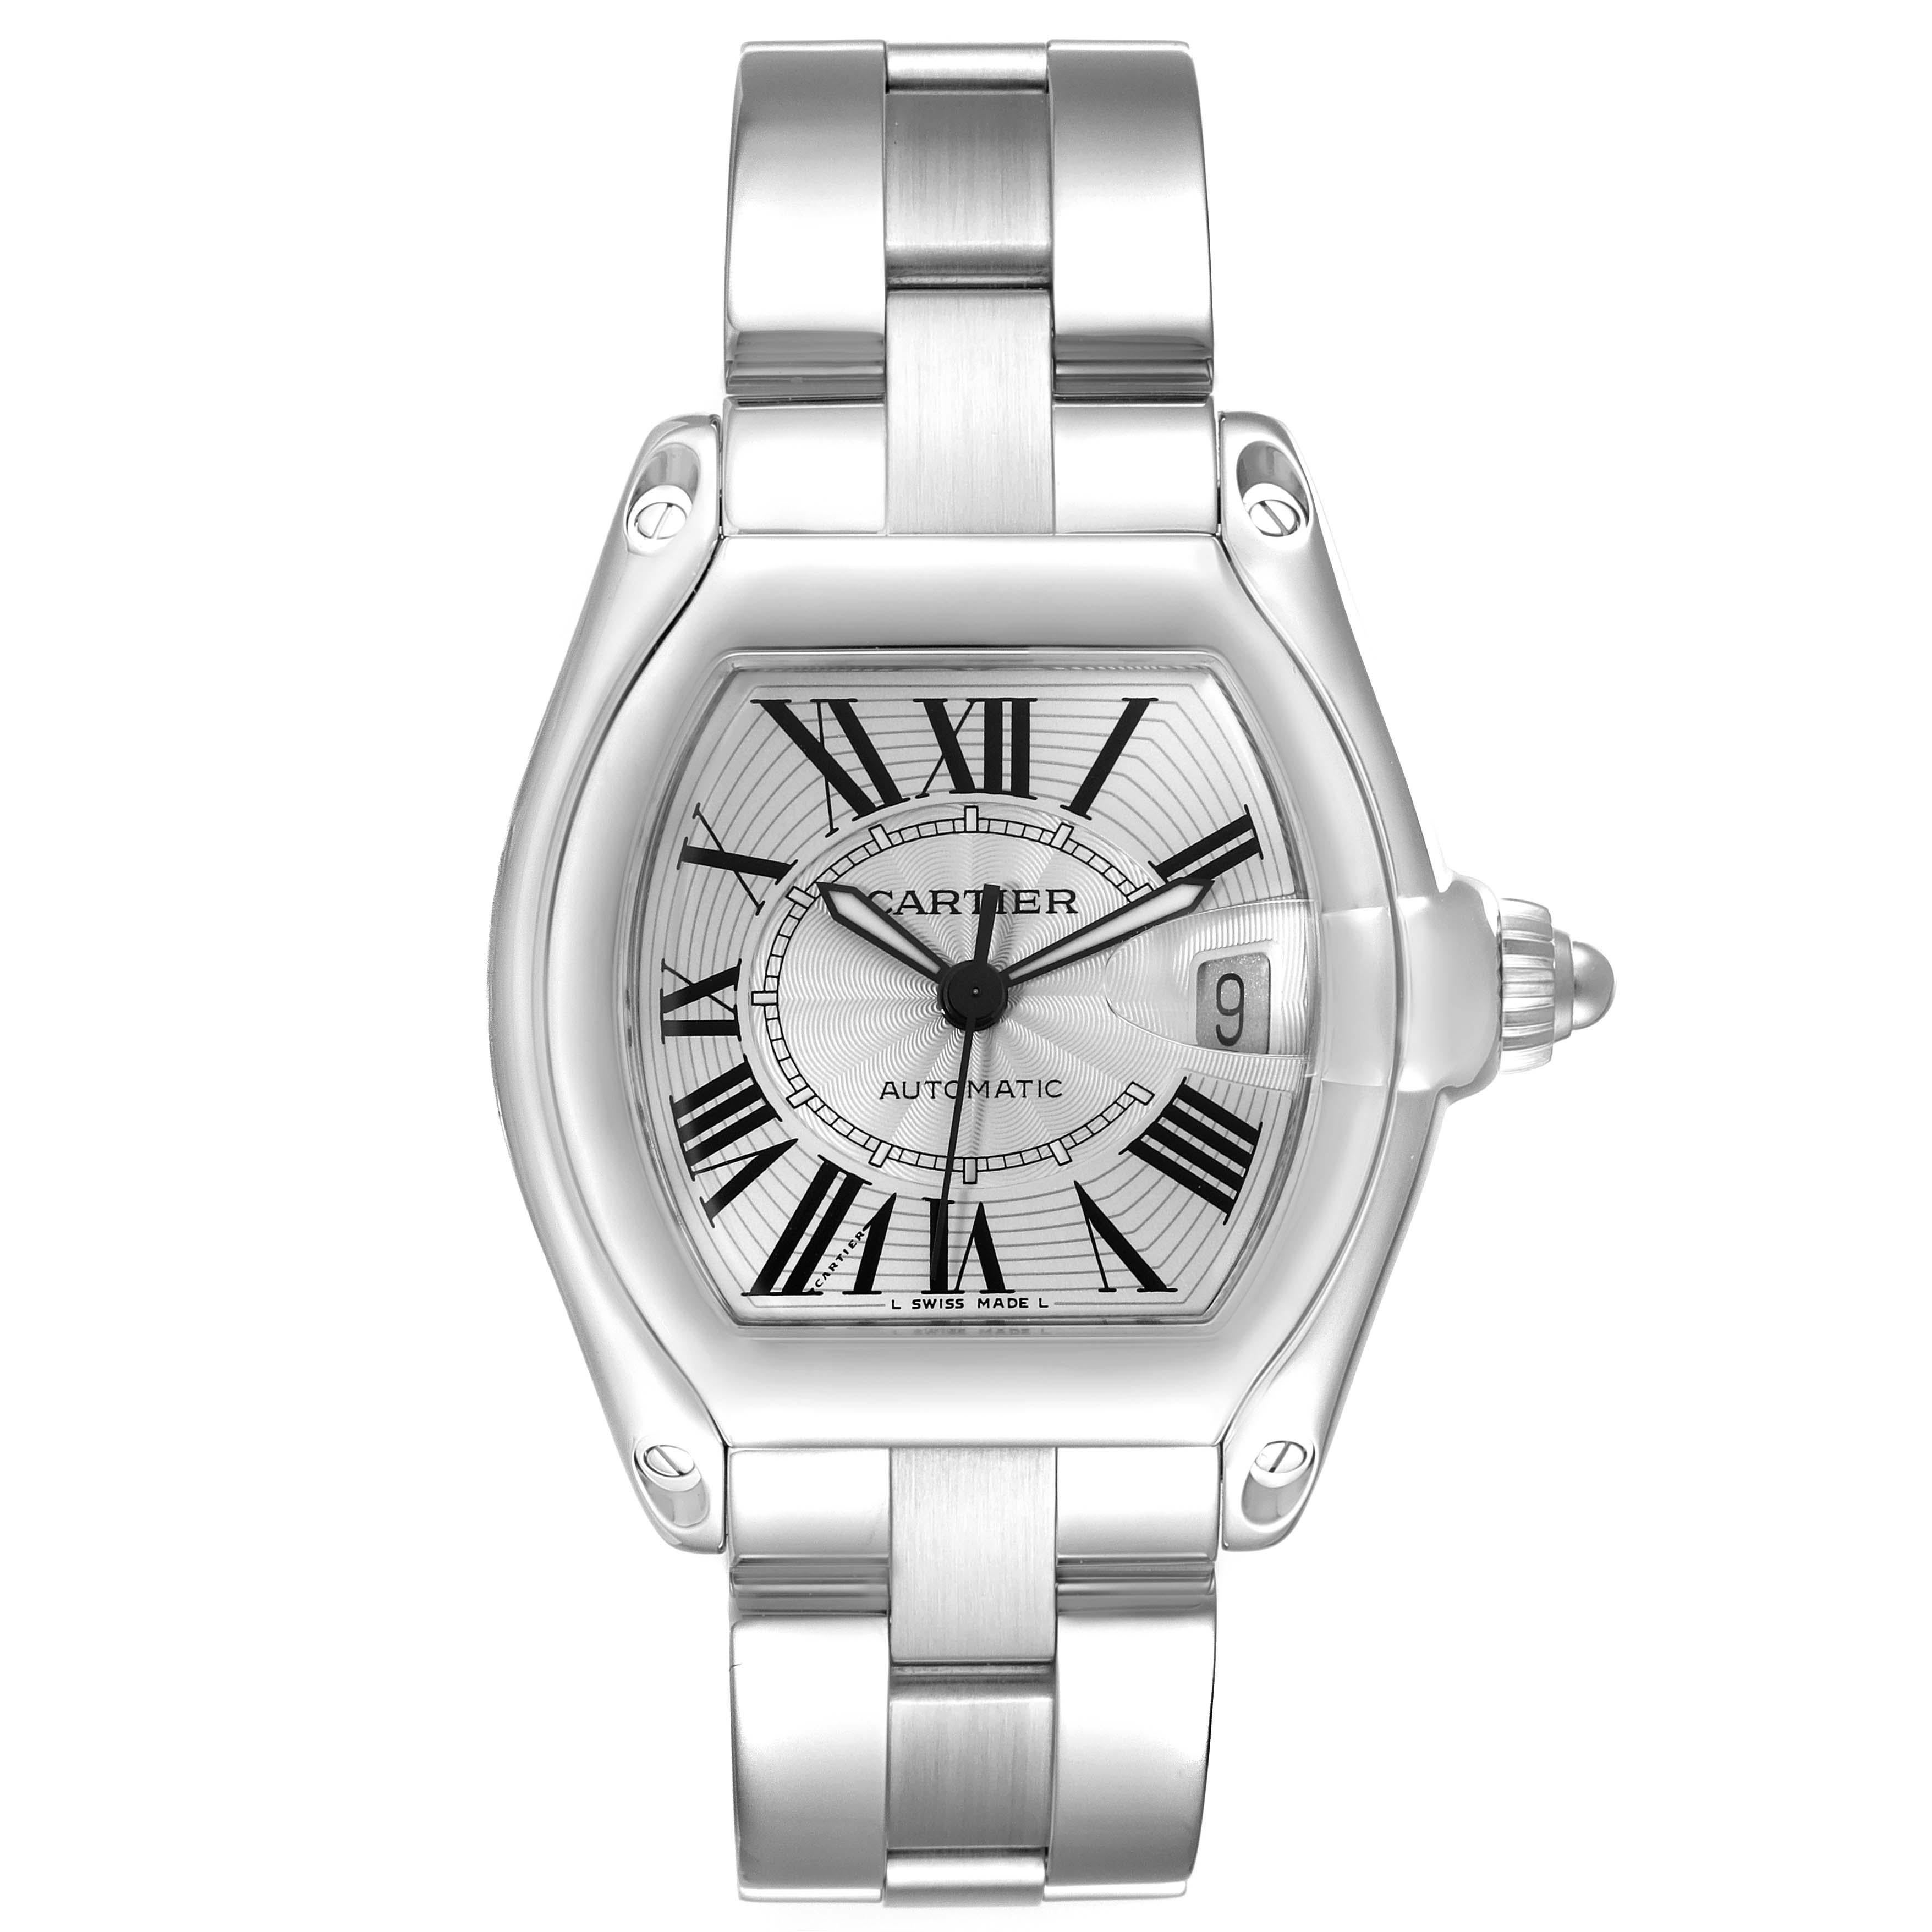 Cartier Roadster Silver Dial Steel Mens Watch W62000V3 Box Papers. Automatic self-winding movement. Stainless steel tonneau shaped case 38 x 43mm. . Scratch resistant sapphire crystal with cyclops magnifying glass. Silver sunray dial with black